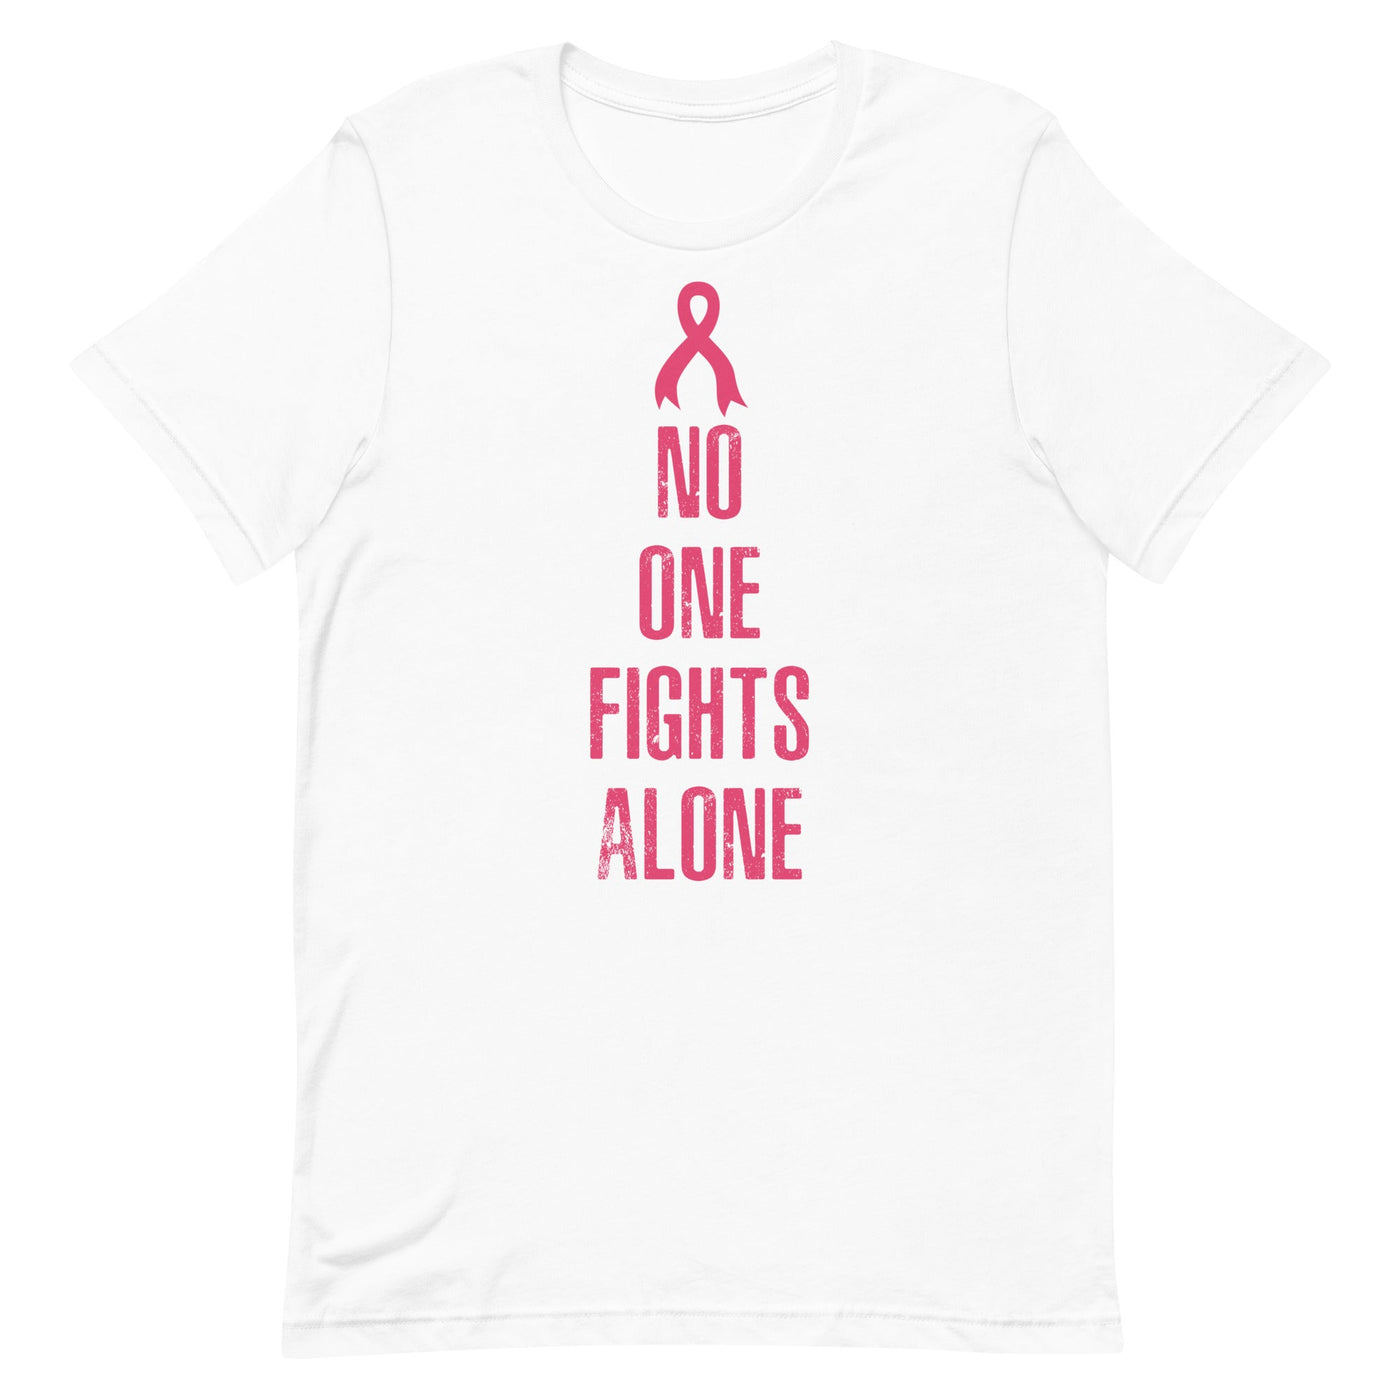 NO ONE FIGHTS ALONE WOMEN'S T-SHIRT- PINK FONT White S 